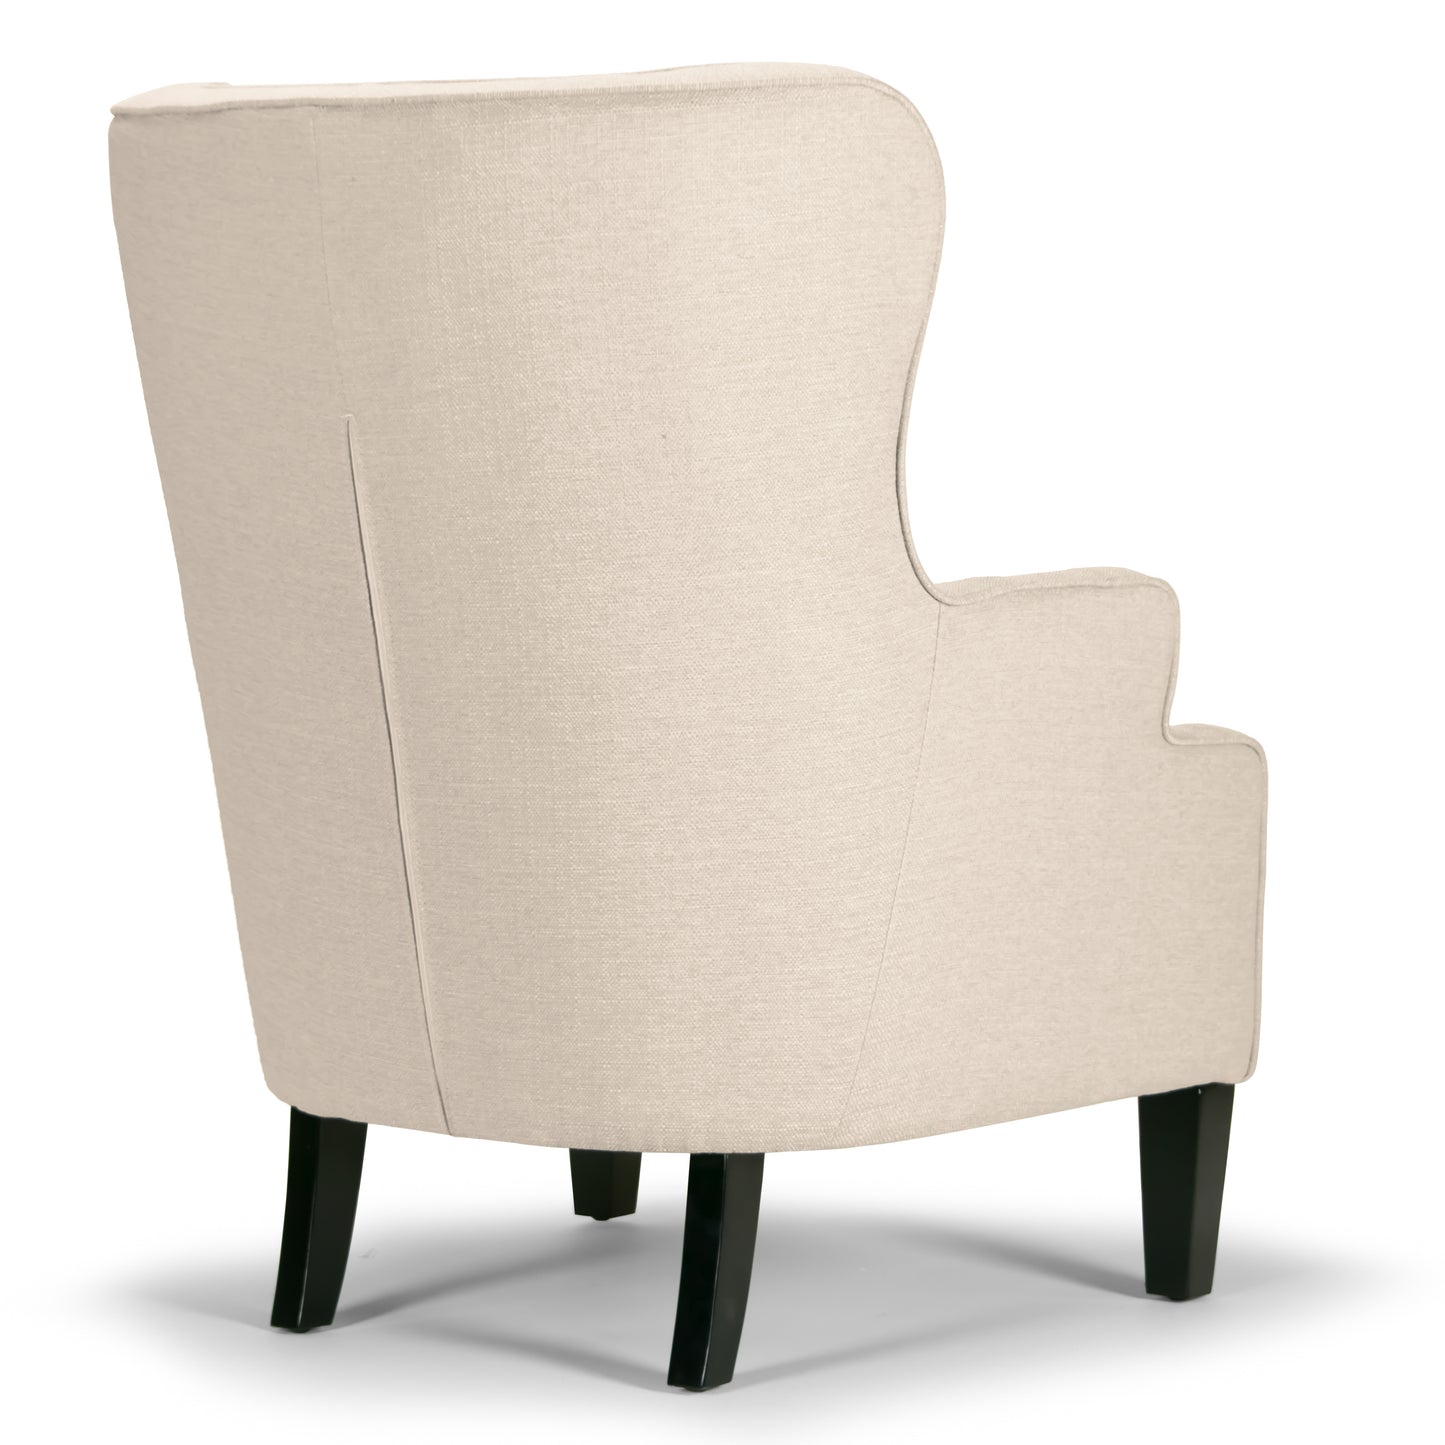 Aletta Beige Fabric High-back Wing Chair with Removable Seat Cushion and Pillow